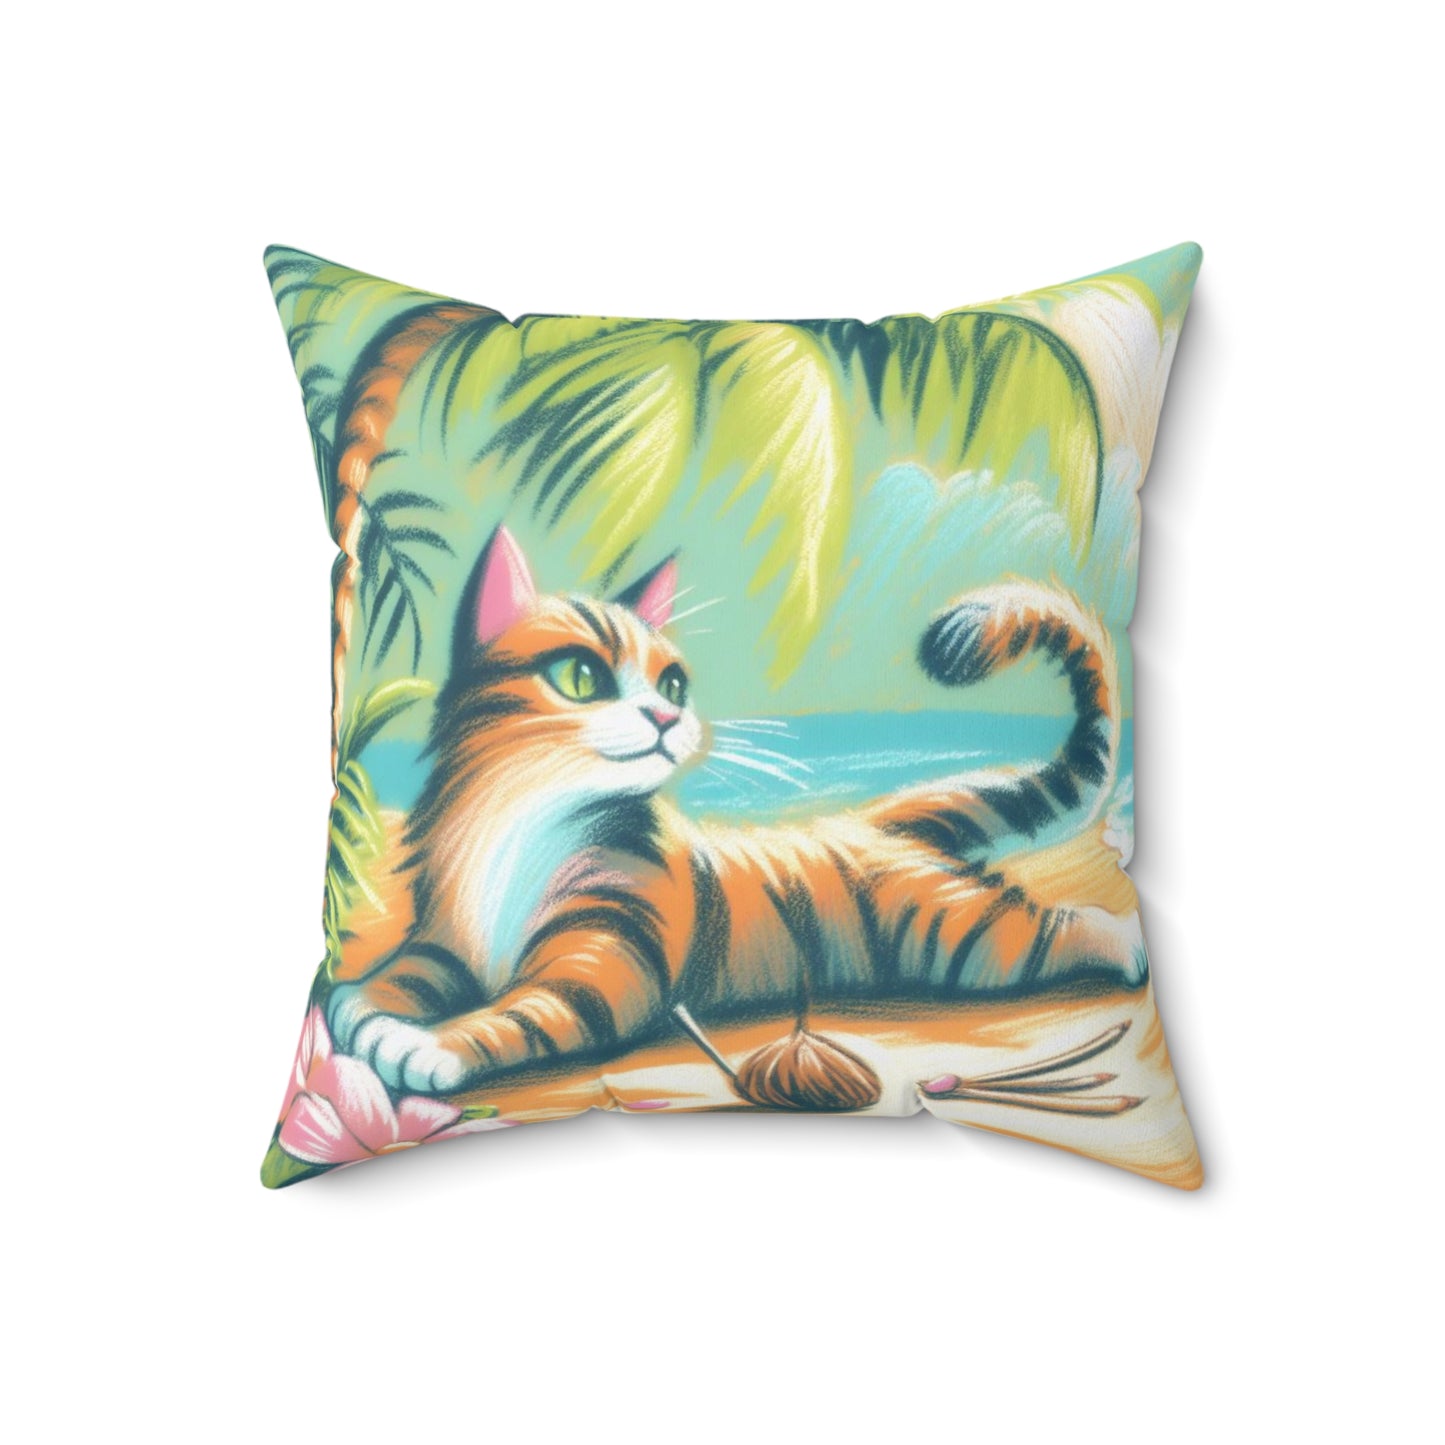 Tropical Kitty Beach Pillow: Sunny Day Serenity for Cat Lovers